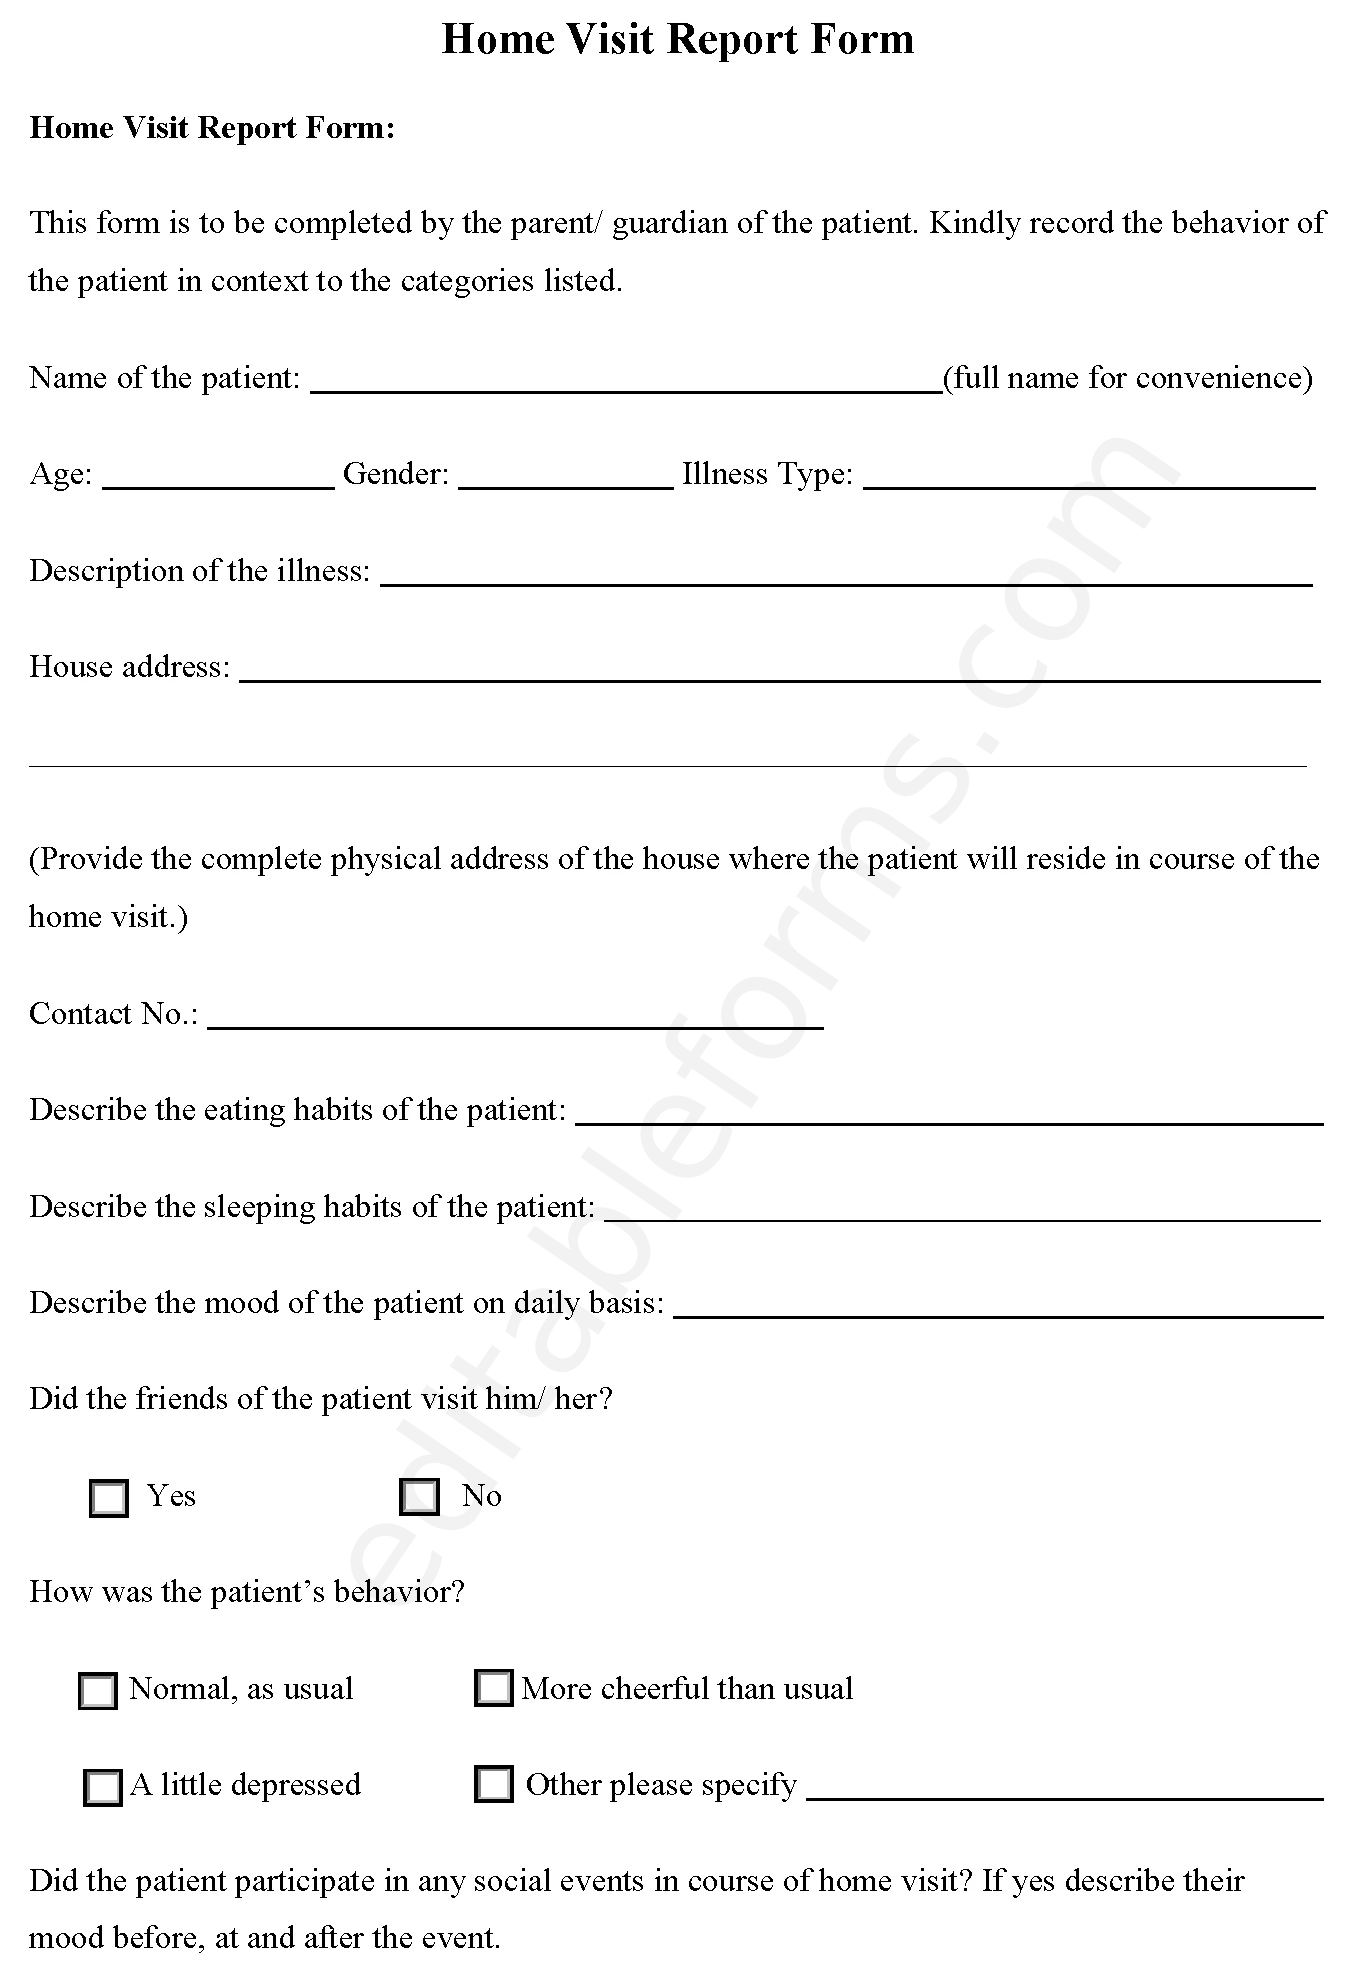 Home Visit Report Fillable PDF Template